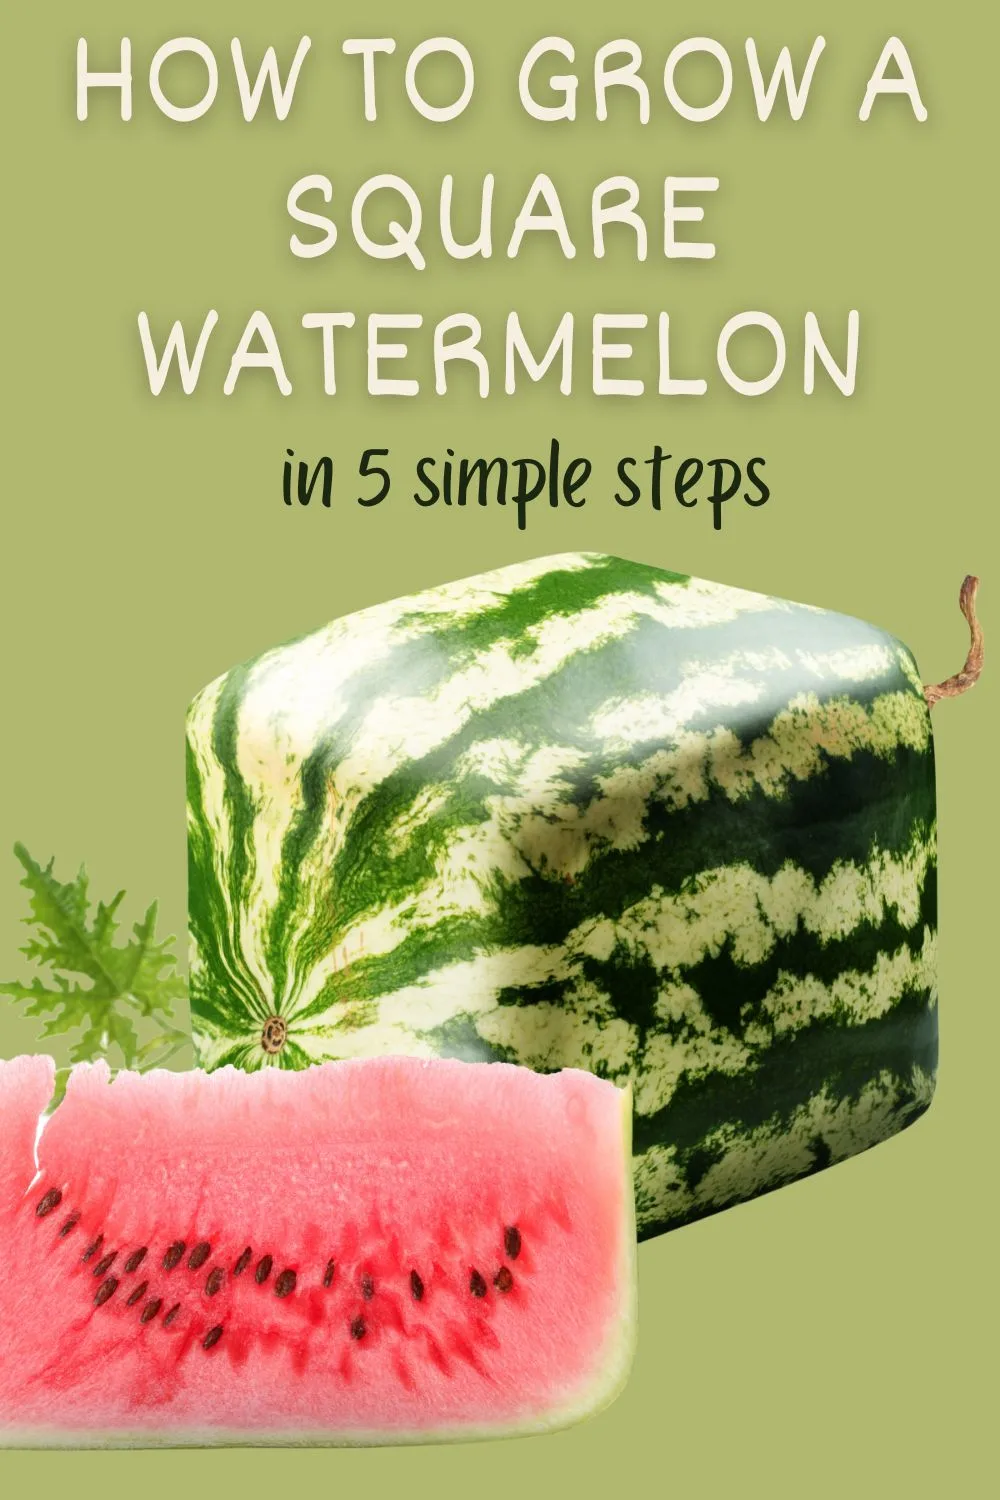 How to grow a square watermelon in 5 simple steps.